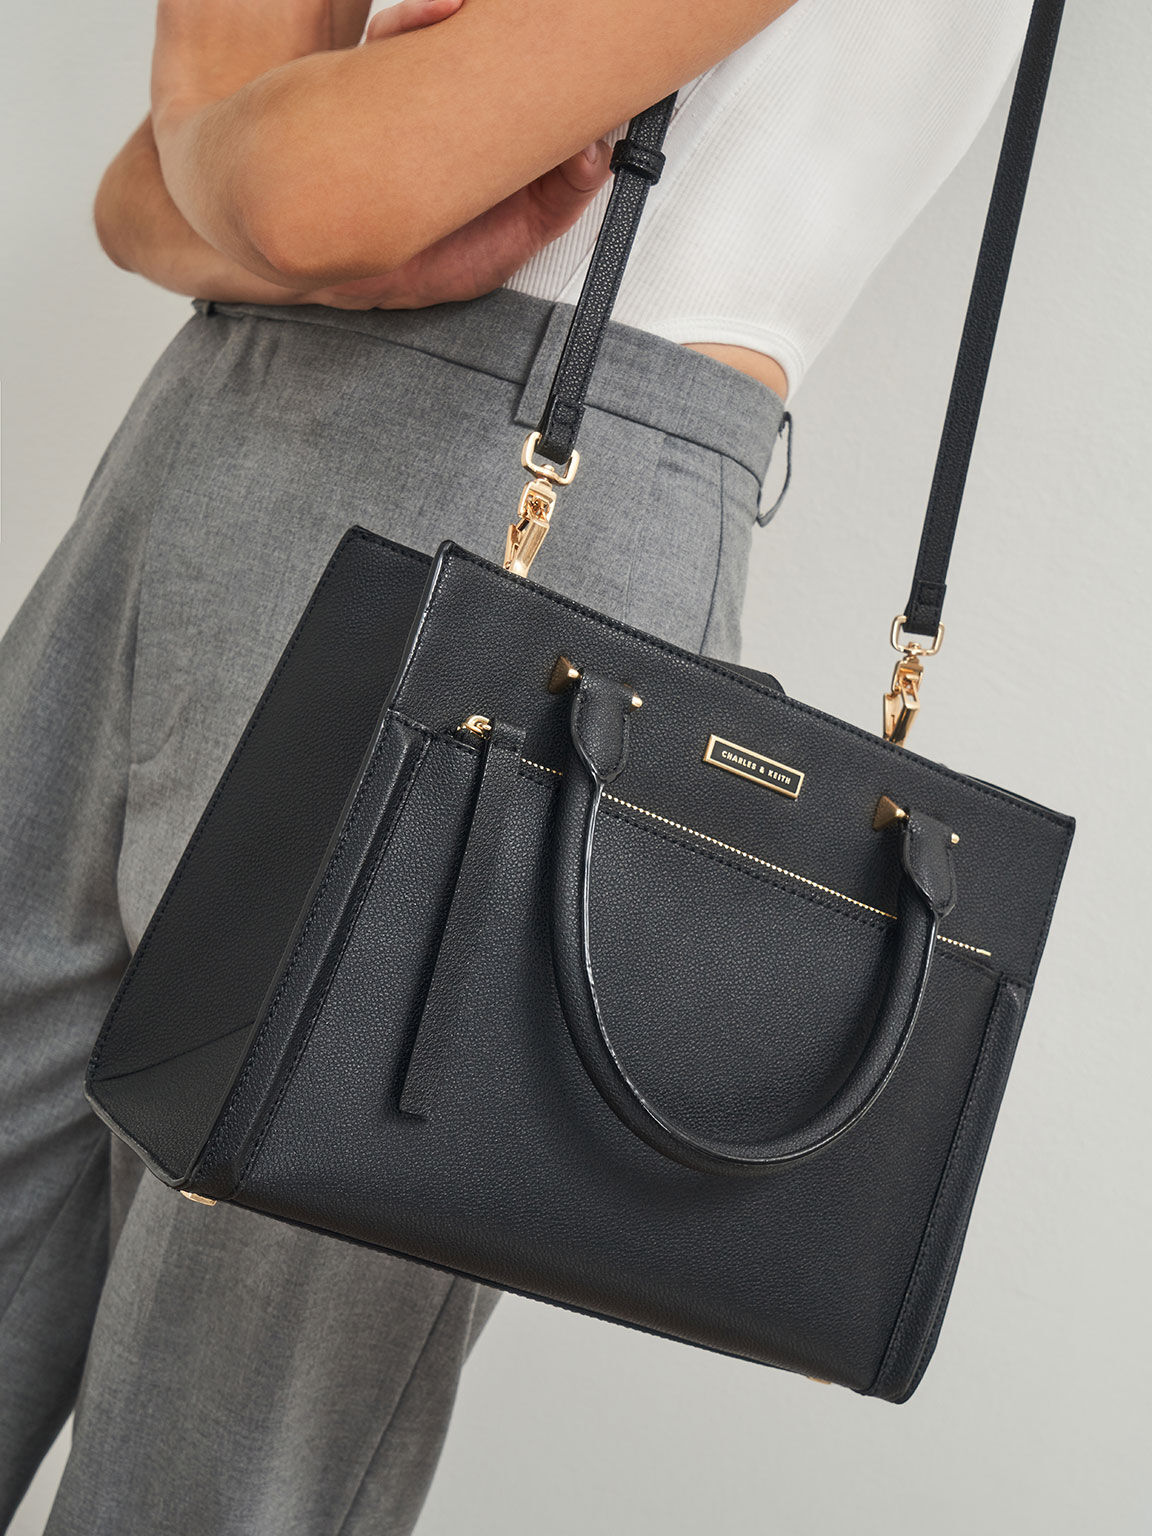 TÚI XÁCH CHARLES KEITH DOUBLE HANDLE FRONT ZIP TOTE BAG 6